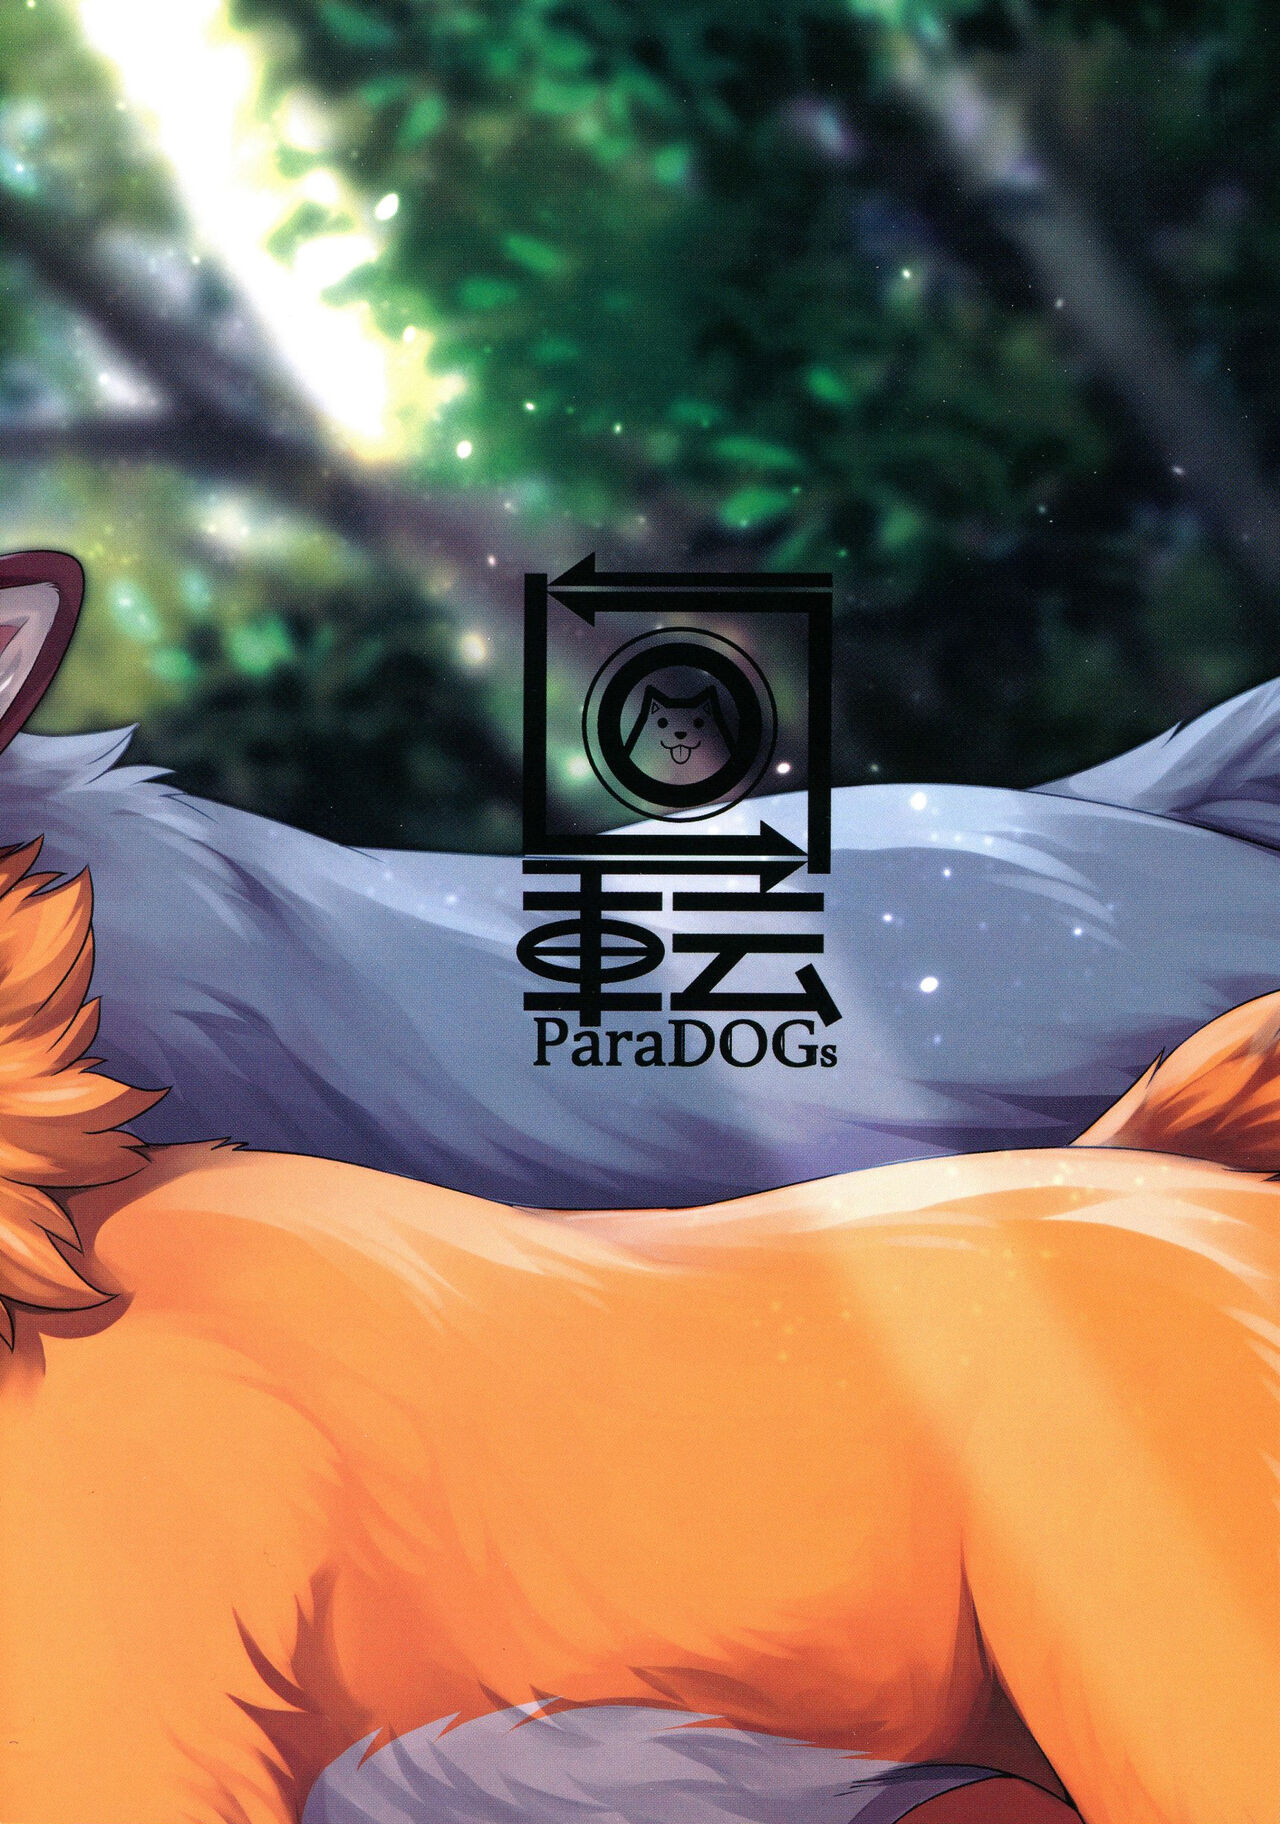 (Kemoket 12) [Kaiten ParaDOGs (Minaga Tsukune)] IN THE FOREST | 森林之中 [Chinese] [火兔汉化组] (けもケット12) [回転ParaDOGs (水賀つくね)] IN THE FOREST [中国翻訳]